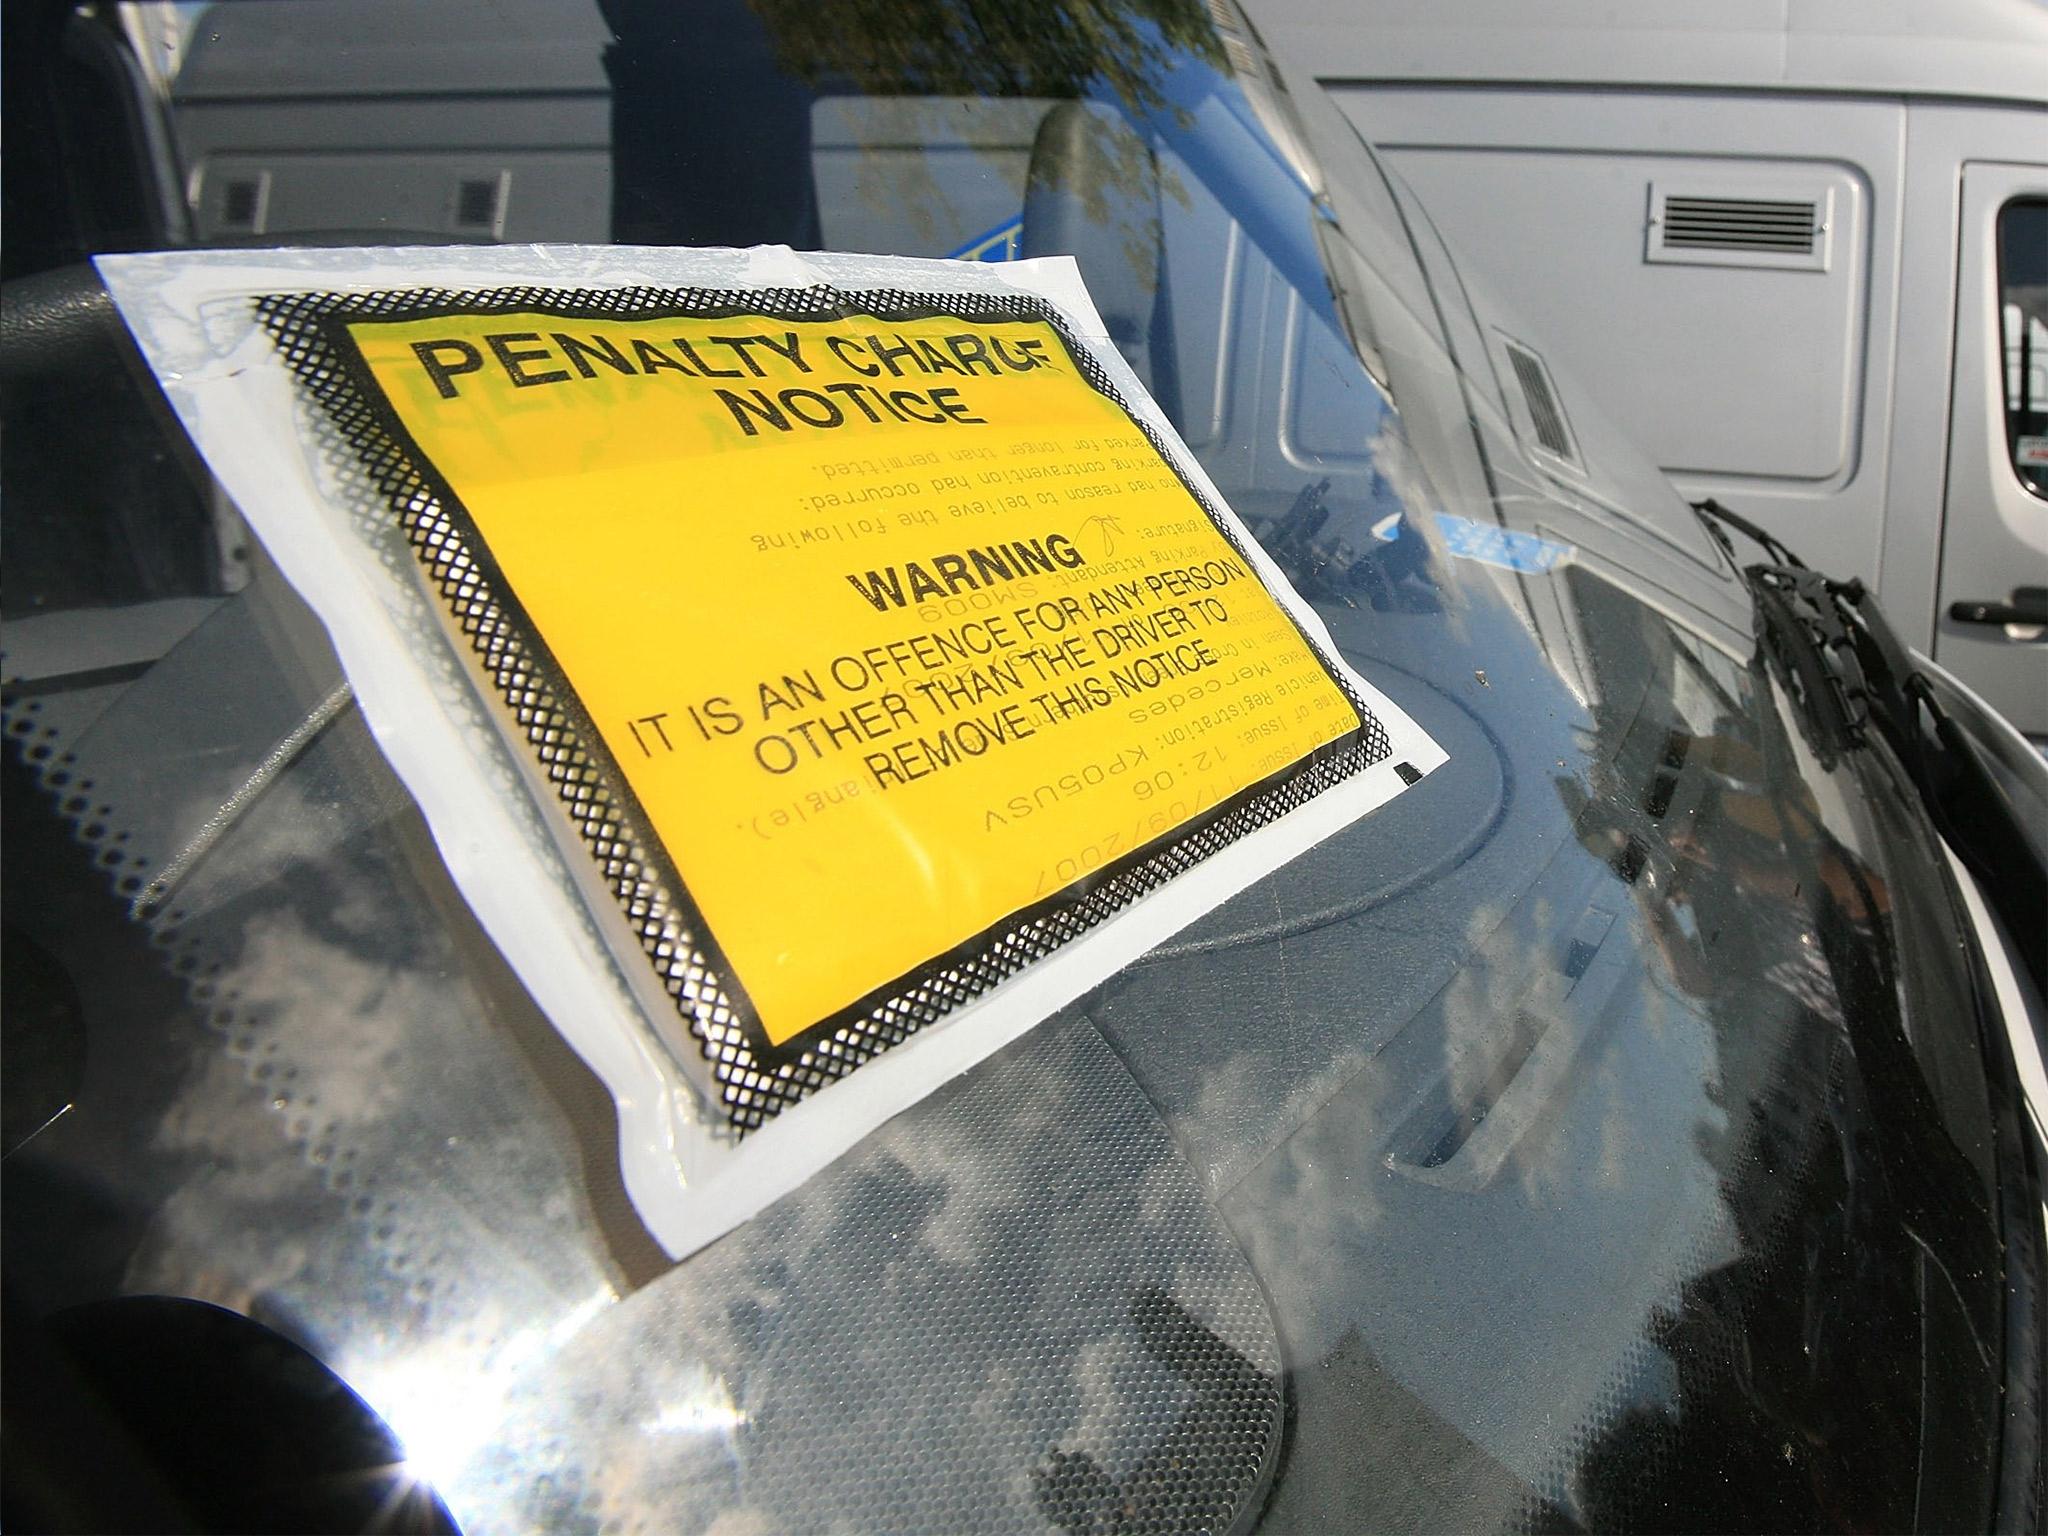 About 2.5 million parking tickets are issued by private companies each year